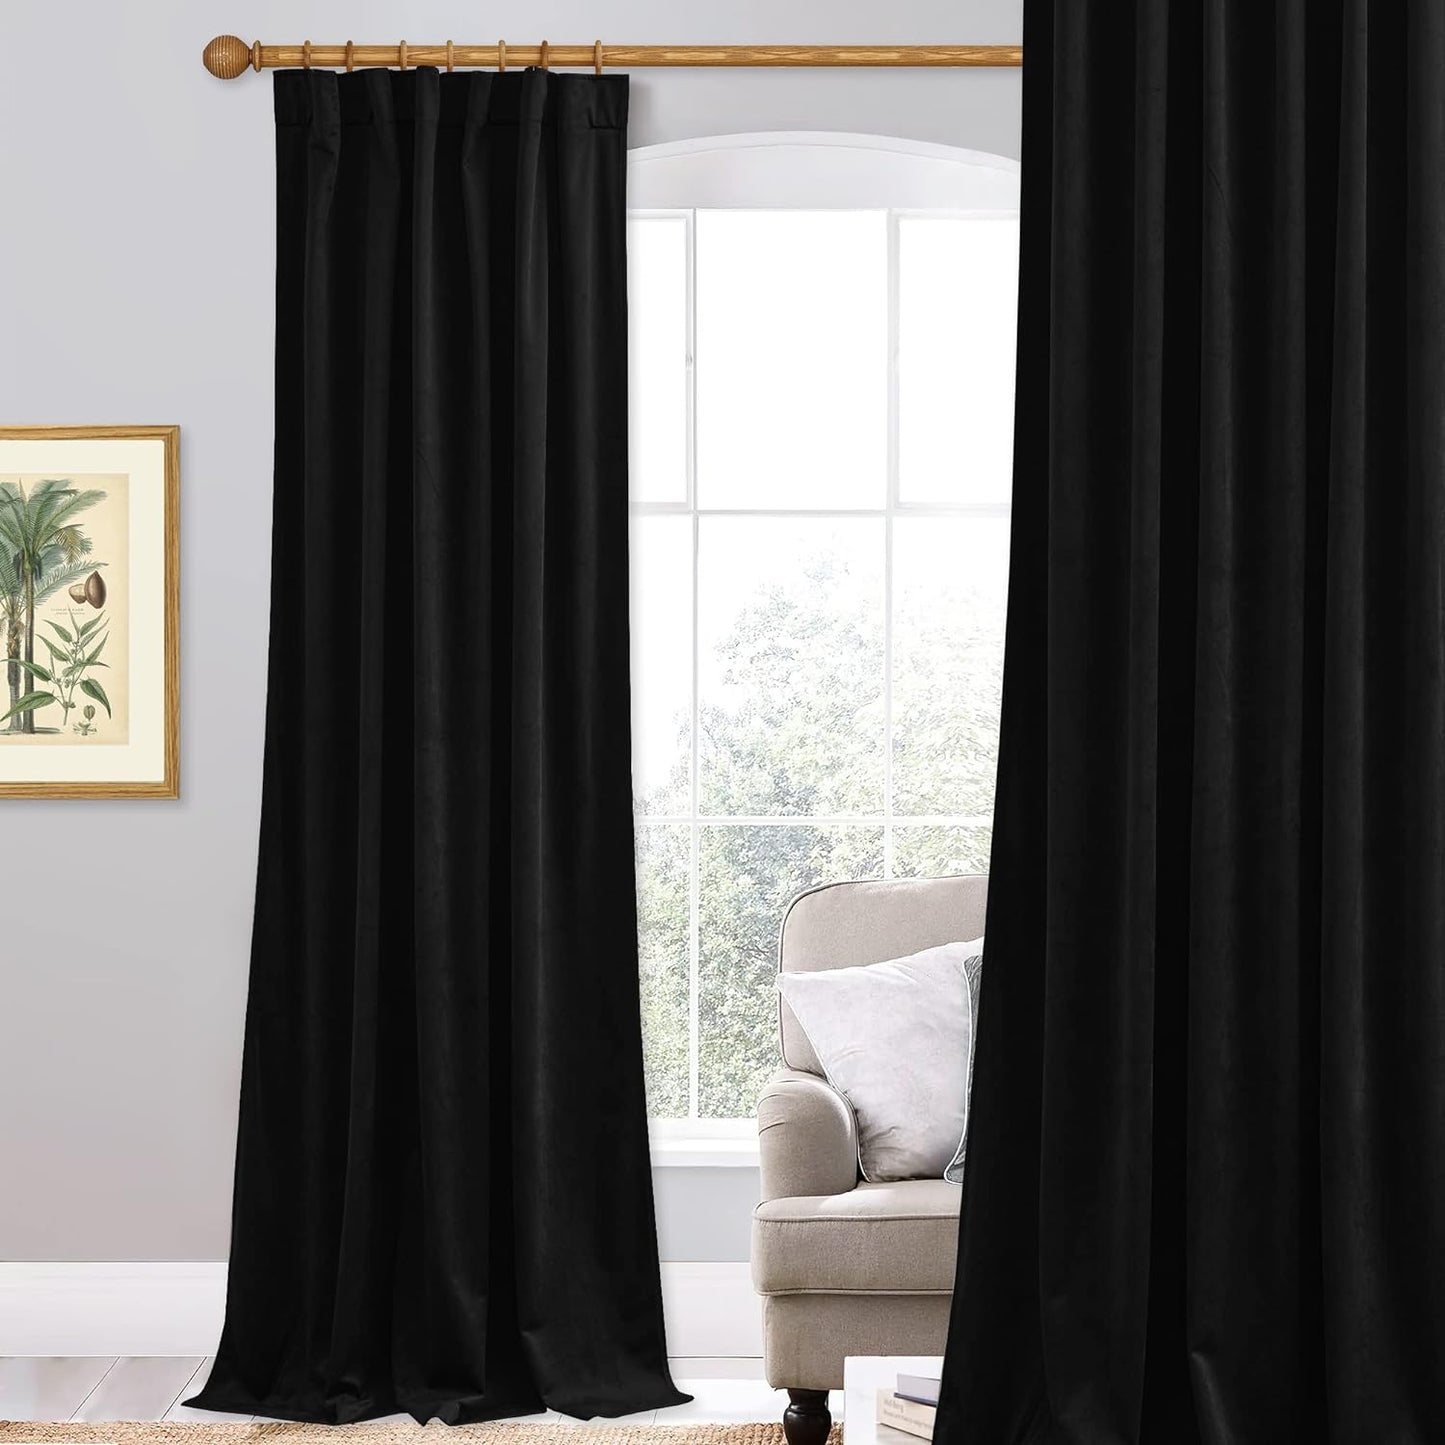 Stangh Navy Blue Velvet Curtains 96 Inches Long for Living Room, Luxury Blackout Sliding Door Curtains Thermal Insulated Window Drapes for Bedroom, W52 X L96 Inches, 1 Panel  StangH Black W52 X L102 